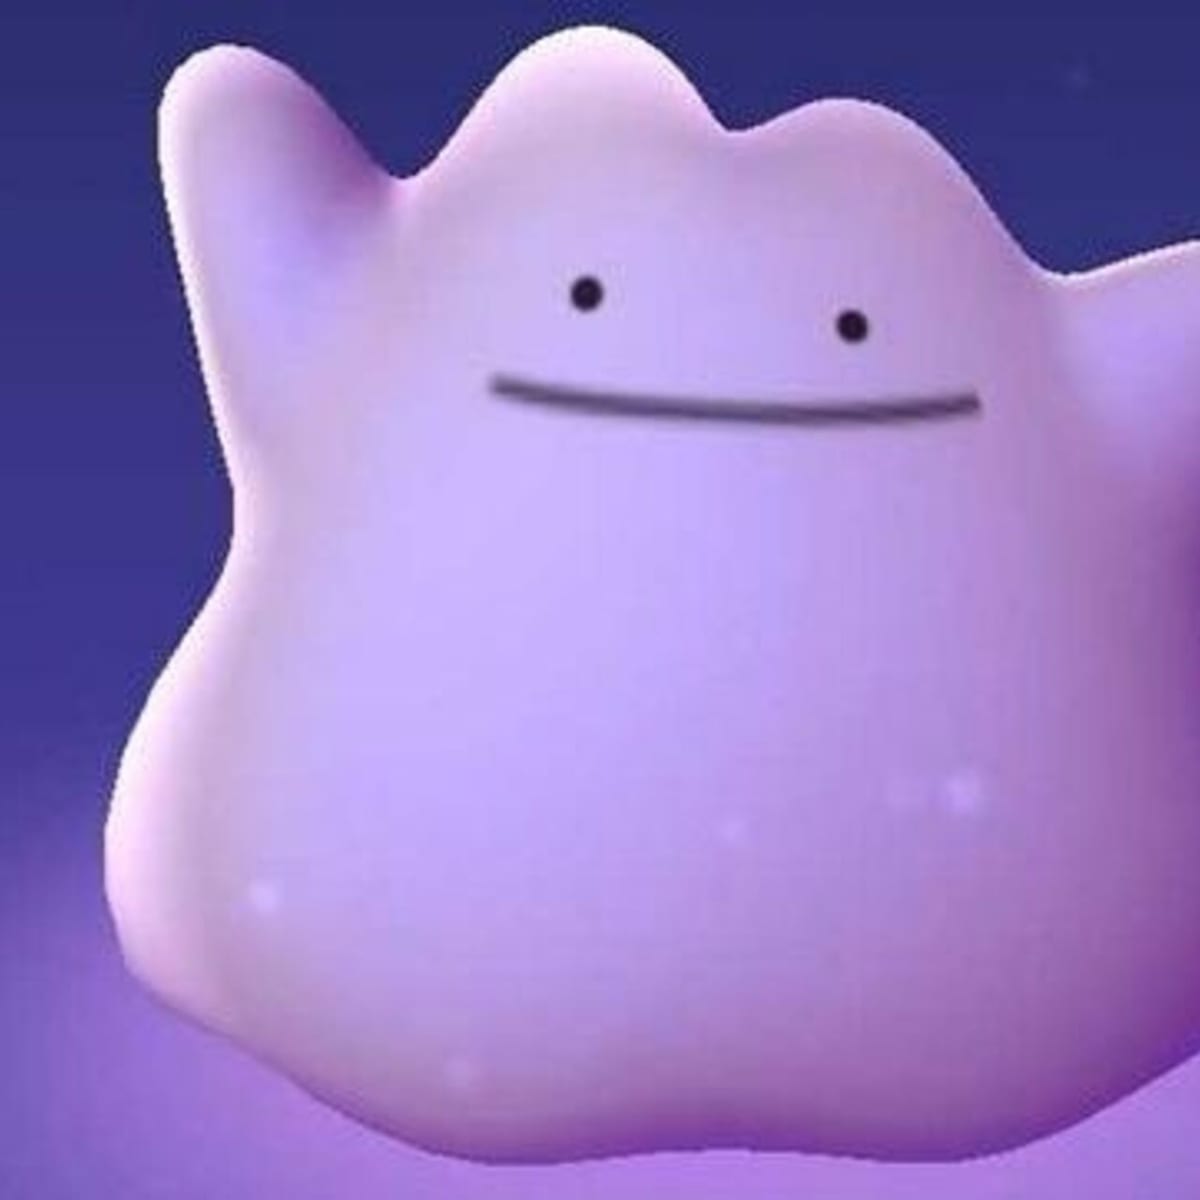 Double move Ditto is just two transforms 🤔 : r/PokemonQuest